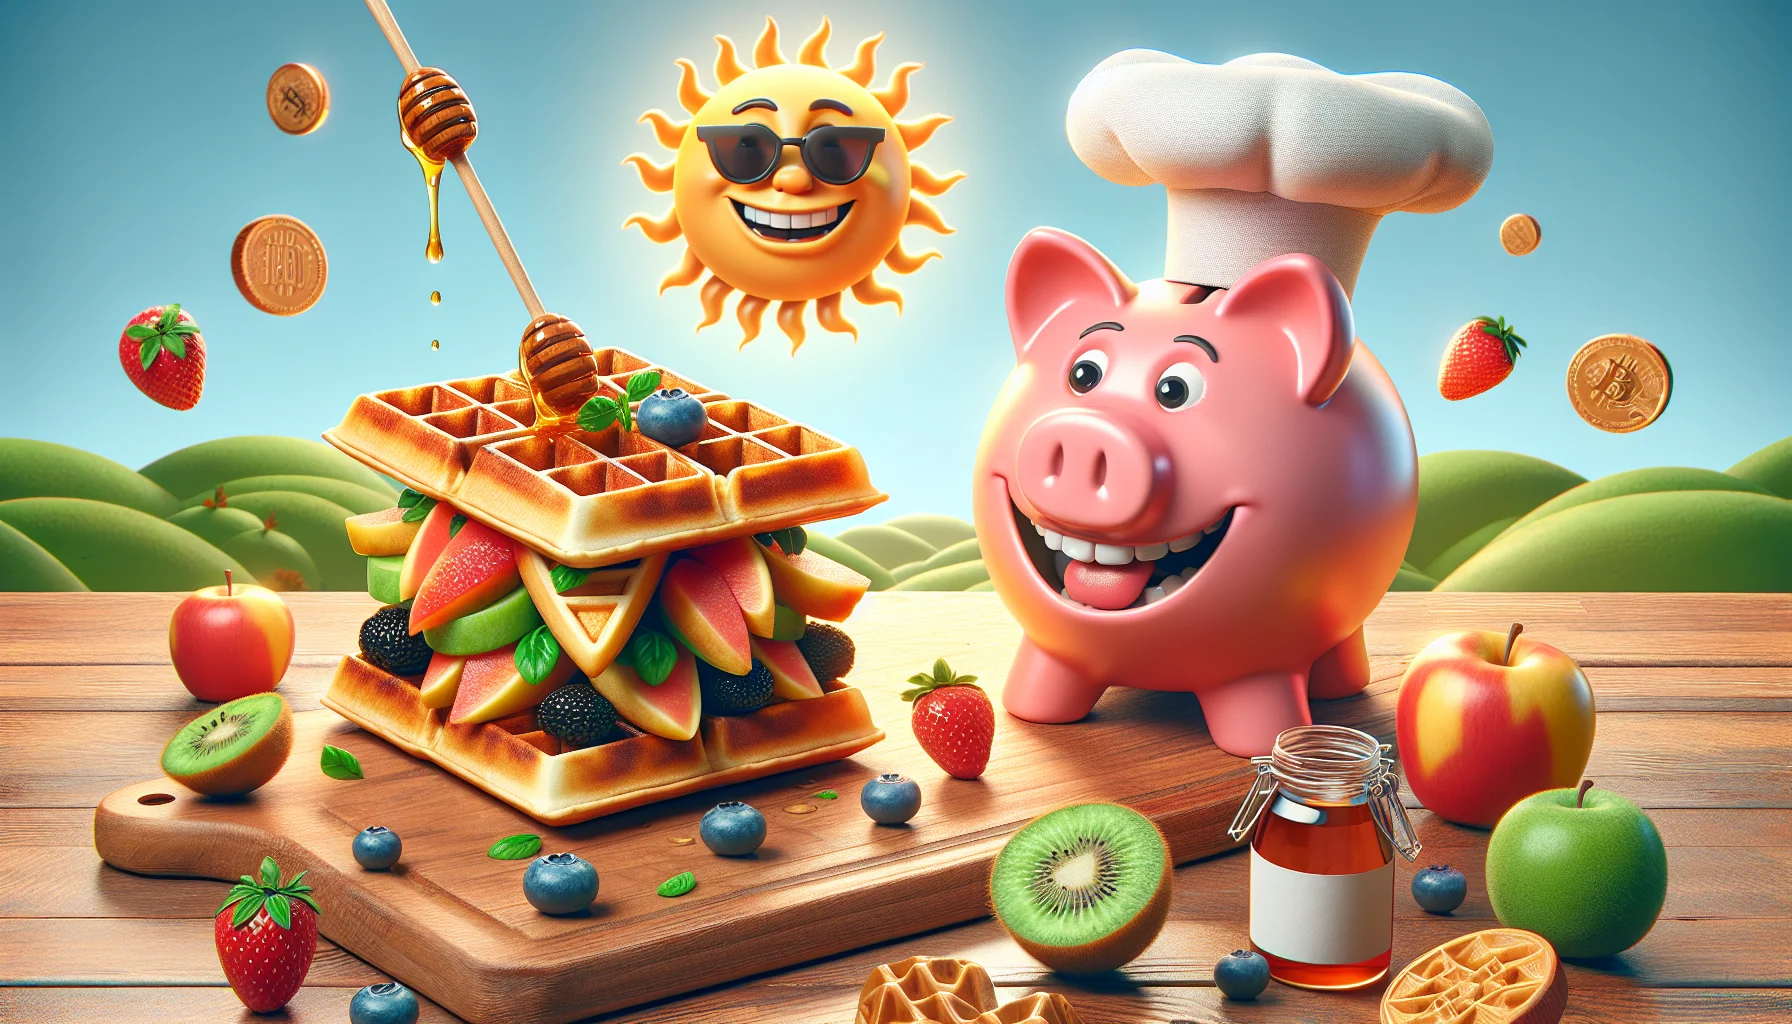 Create an image of a gourmet waffle breakfast sandwich scenario that promotes eating healthy on a budget. Picture two waffle sandwiches, filled with fresh fruits and a drizzle of honey. An animated piggy bank symbolizing affordability stands to the side, flashing a confident grin and wearing a chef's hat. In the background, a sun with a face and wearing sunglasses, rises behind a rolling hill. The scene is simultaneously whimsical and encouraging, invoking a sense of joy in healthy, affordable eating.